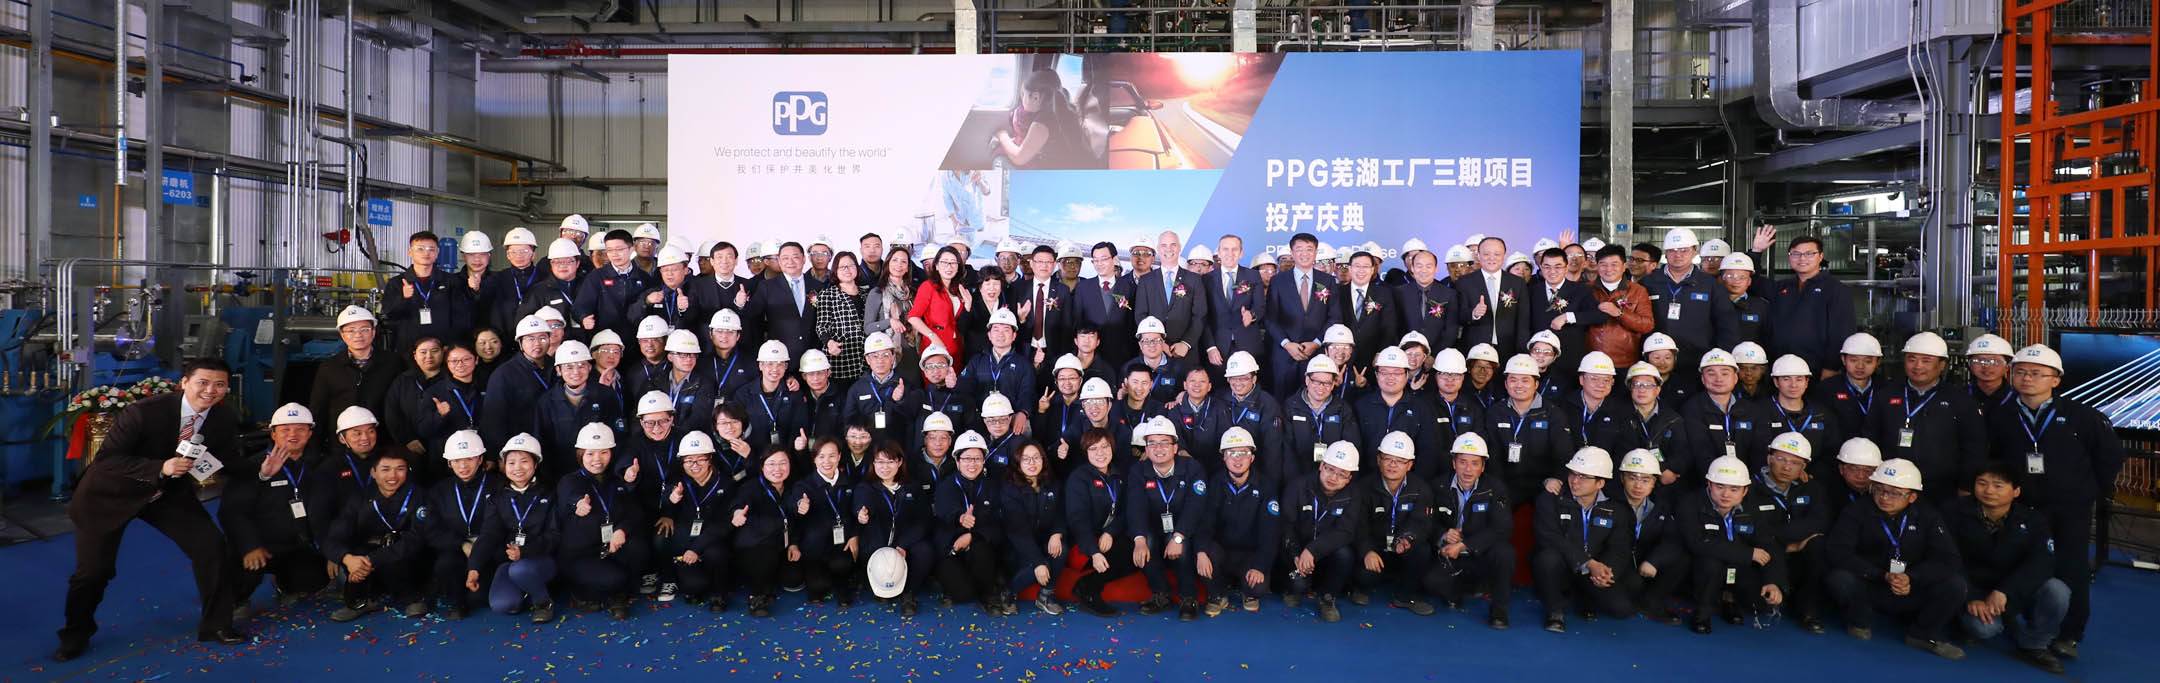 ppg-wuhu-employees-and-guests-are-celebrating-the-opening-of-high-perfor